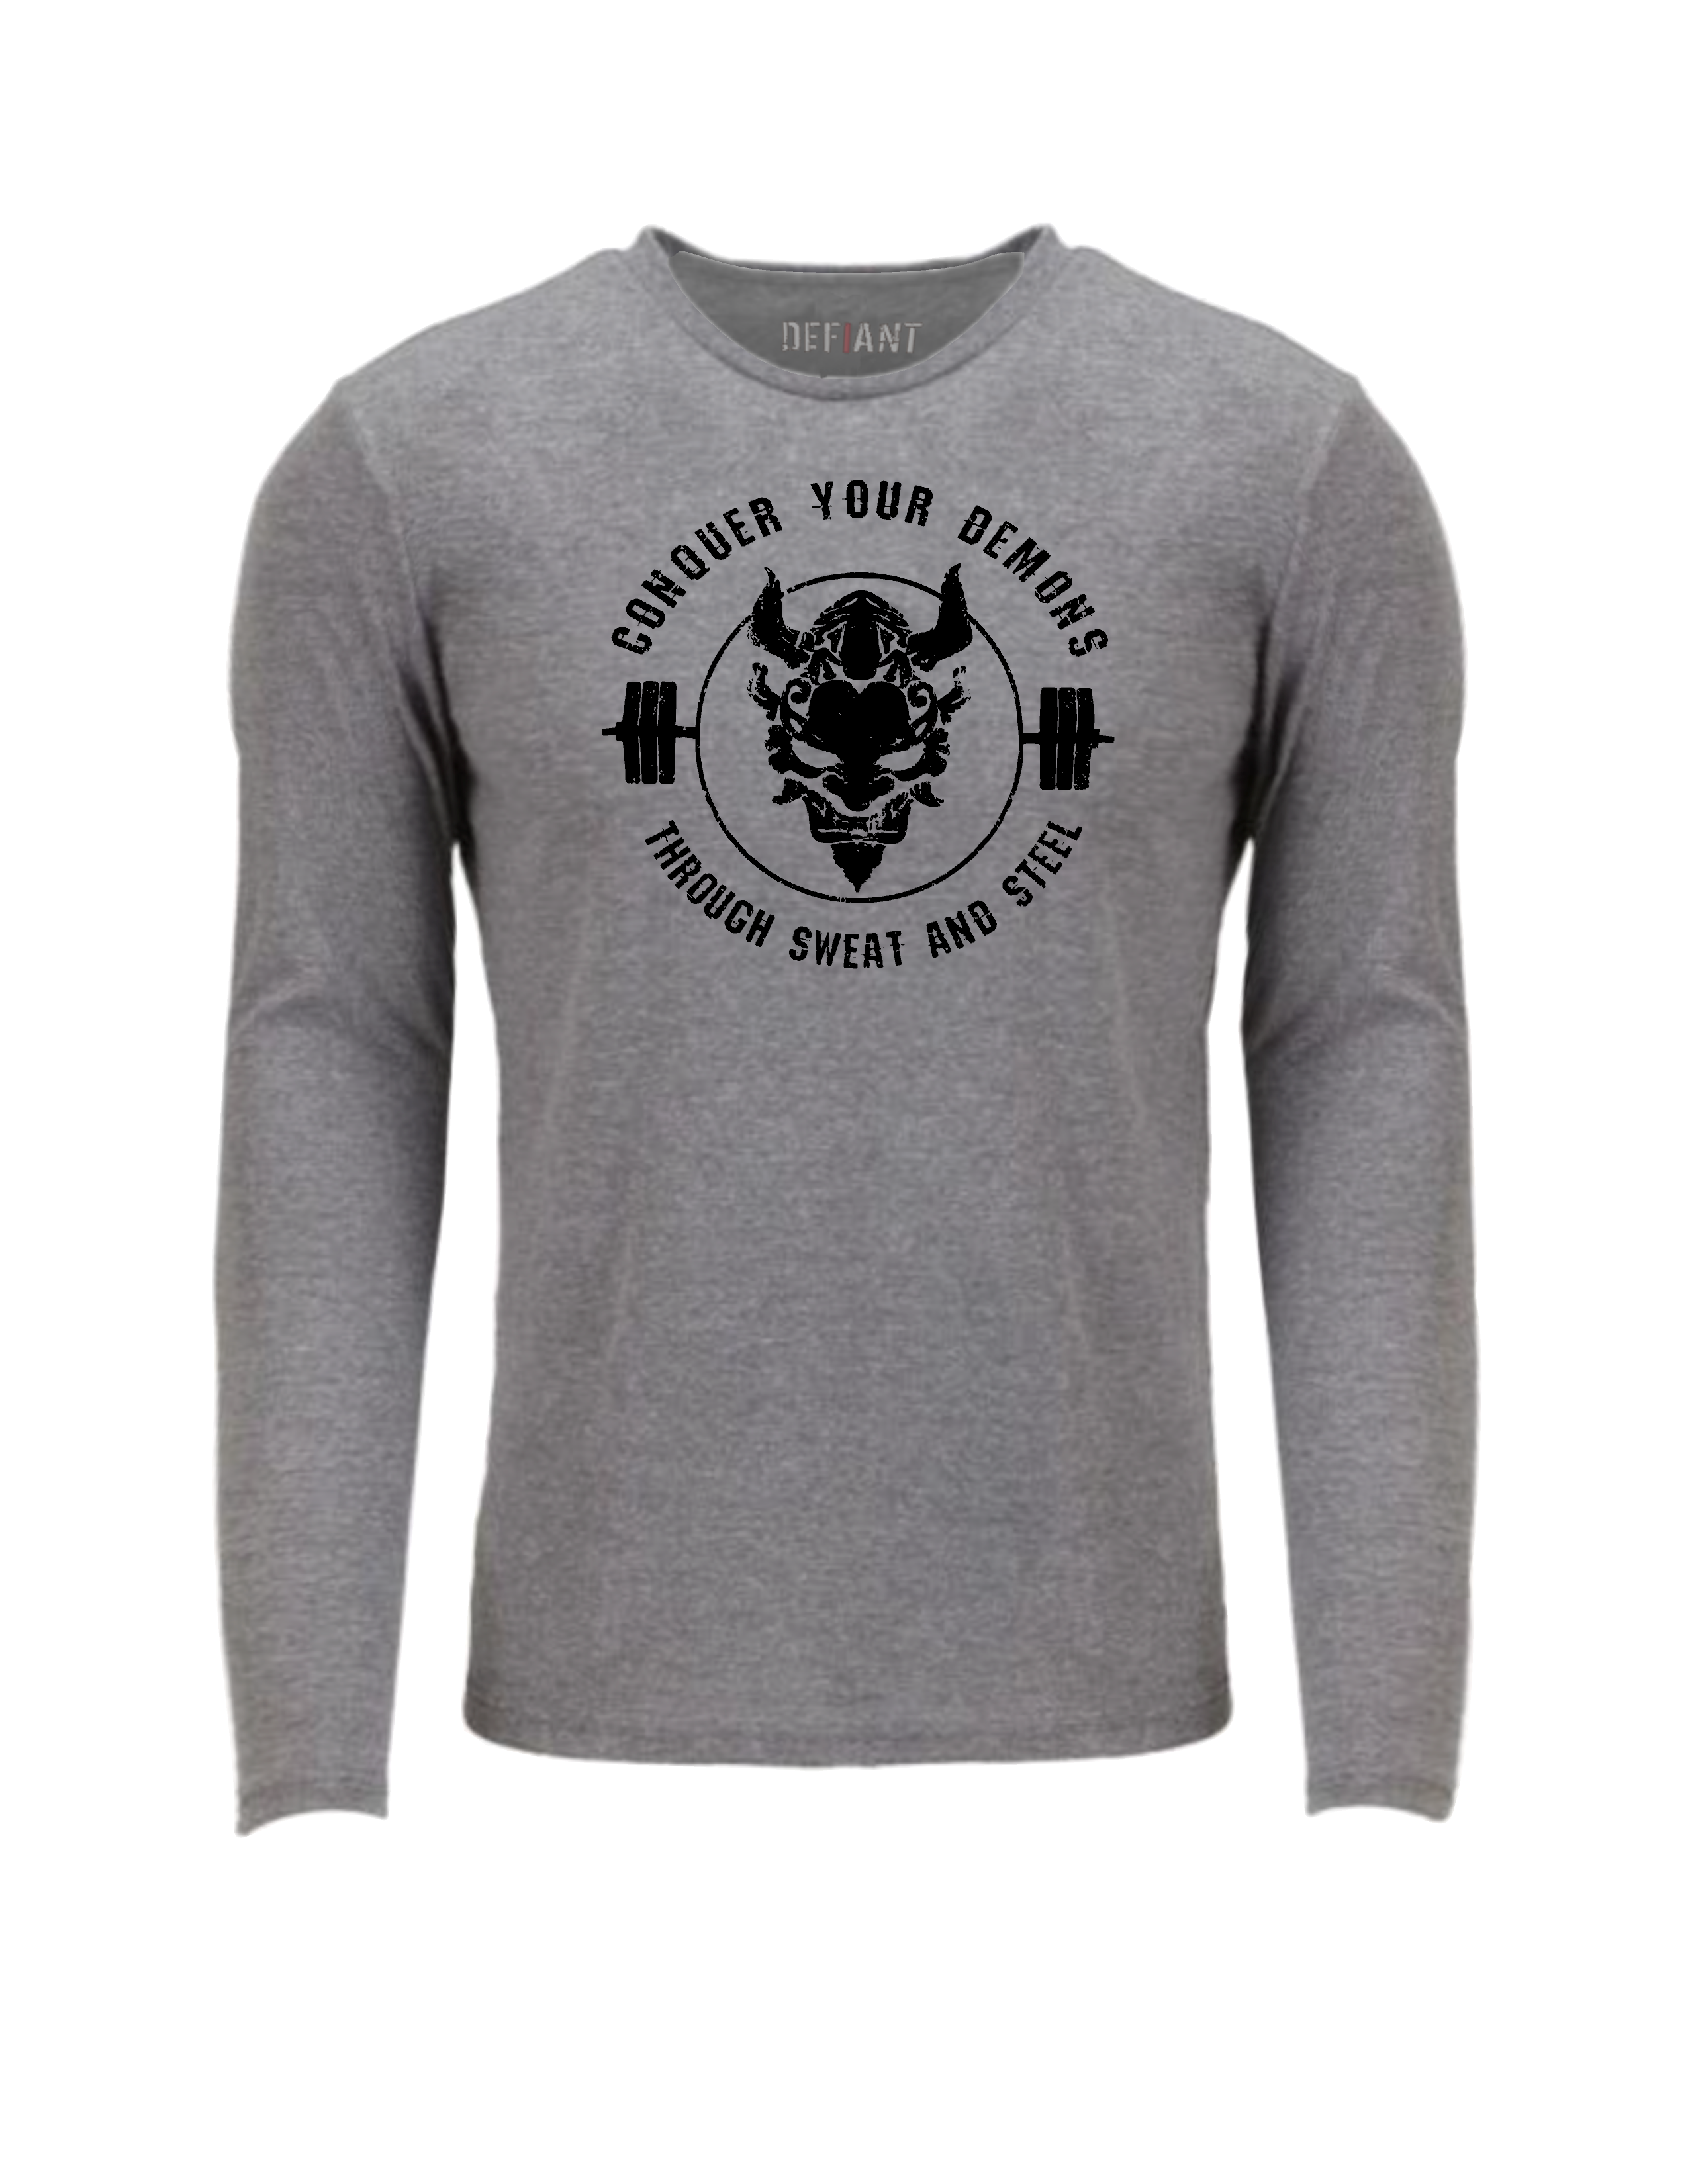 CONQUER YOUR DEMONS - LONG SLEEVE T - HEATHER GRAY - LIMITED RUN!